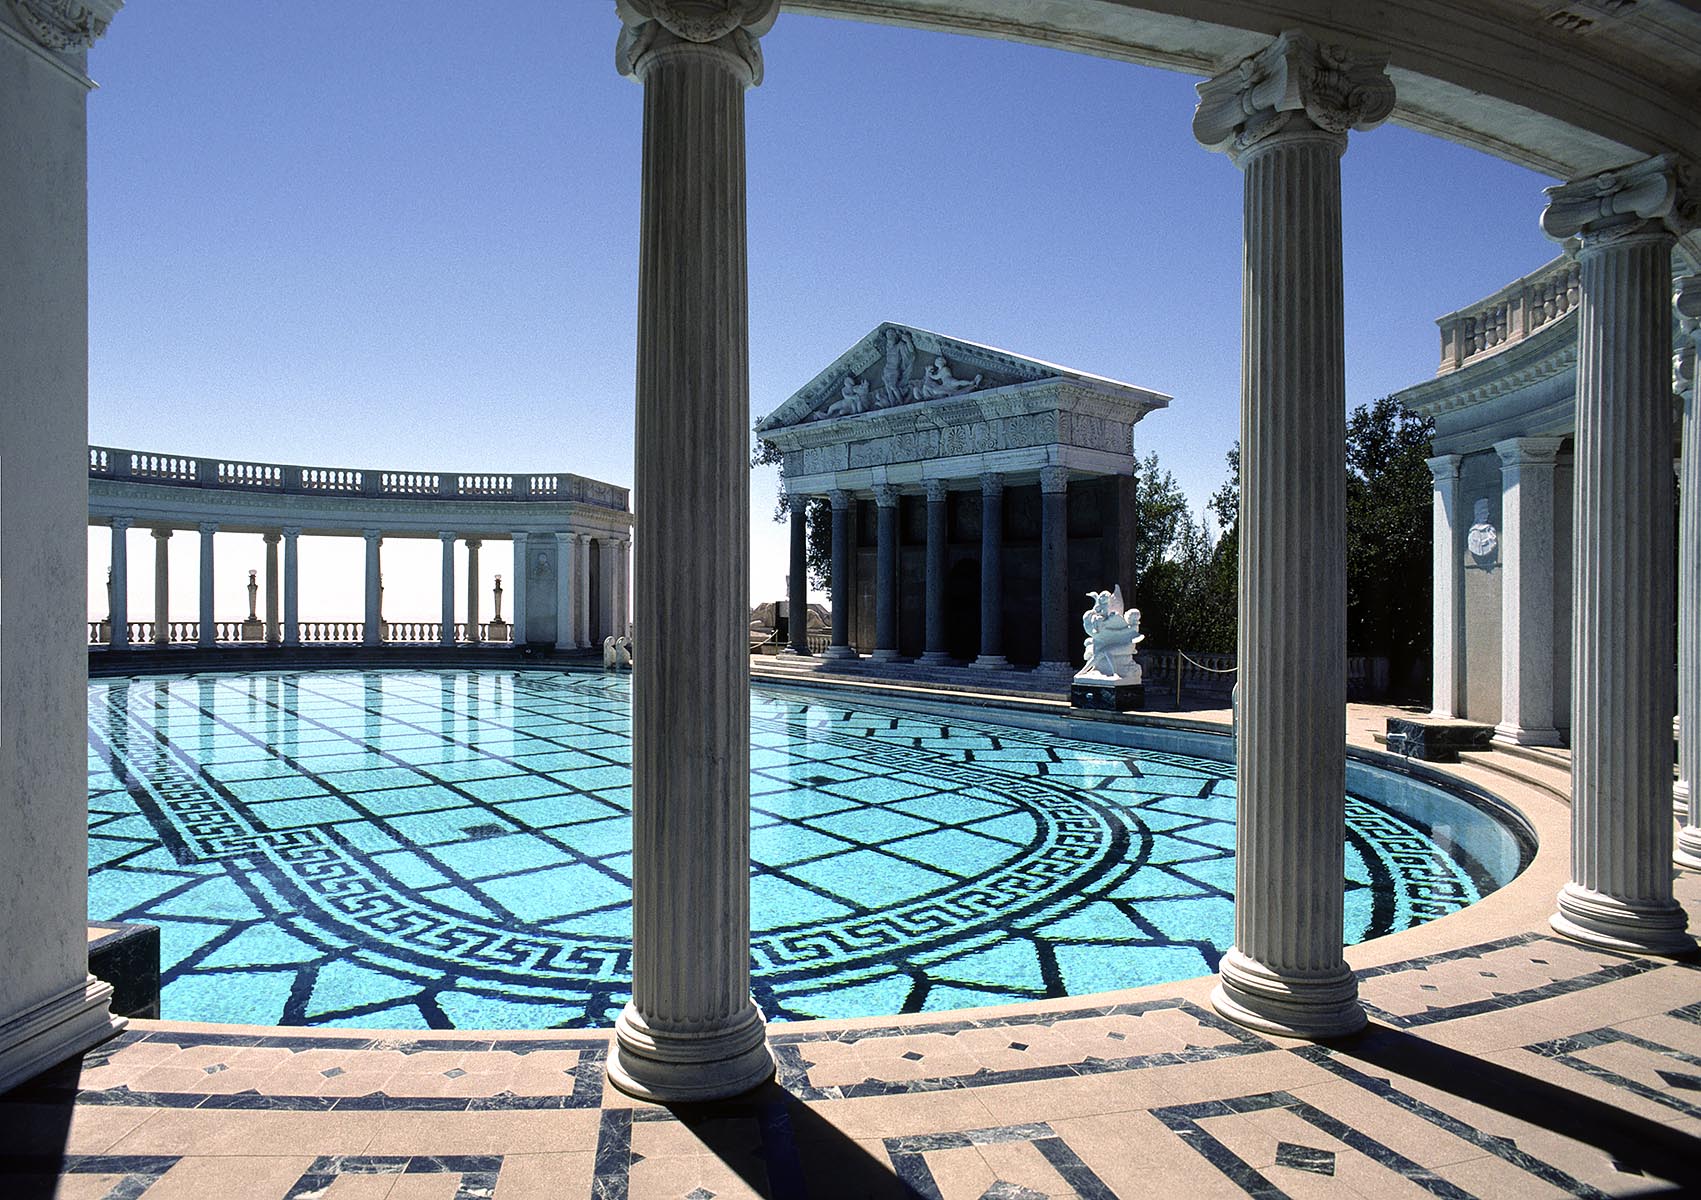 The magnificent outdoor pool at HEARST CASTLE, built by WILLIAM RANDOLPH HEARST, the Newspaper magnate.